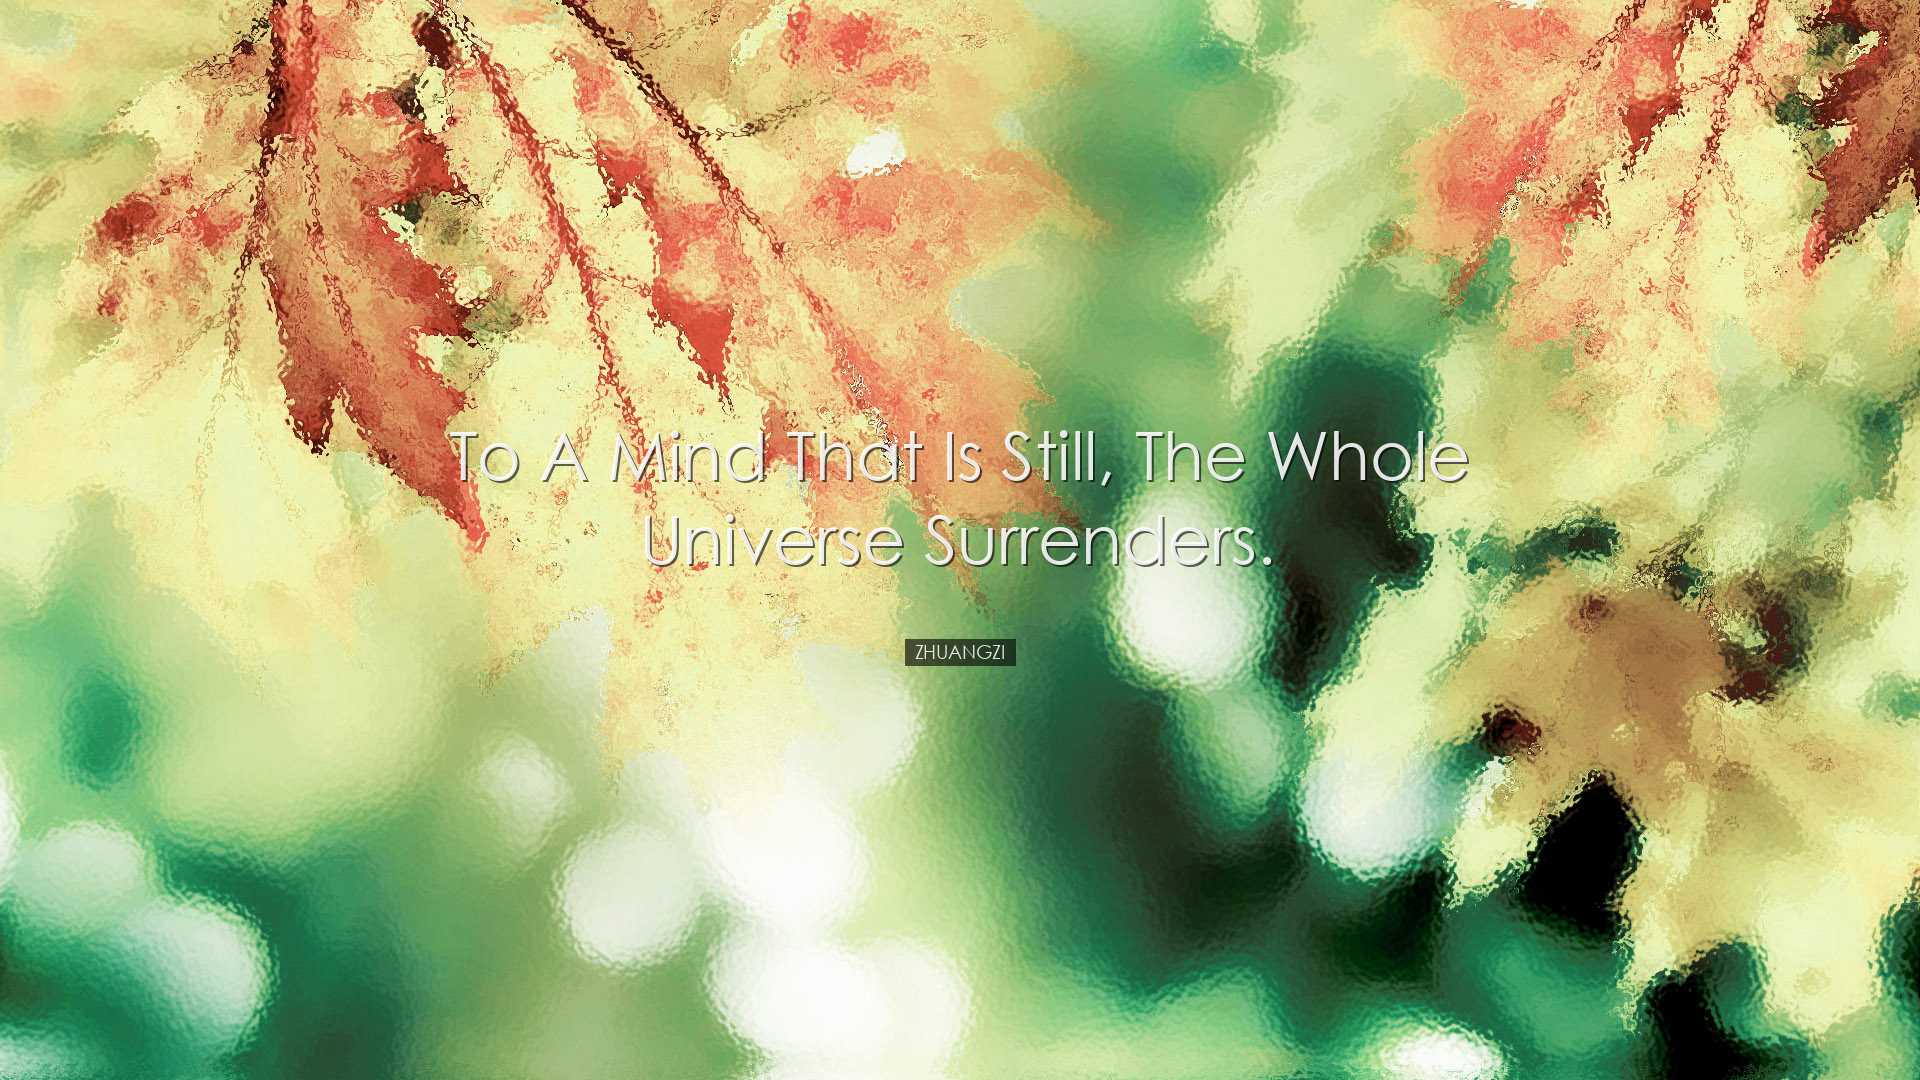 To a mind that is still, the whole universe surrenders. - Zhuangzi